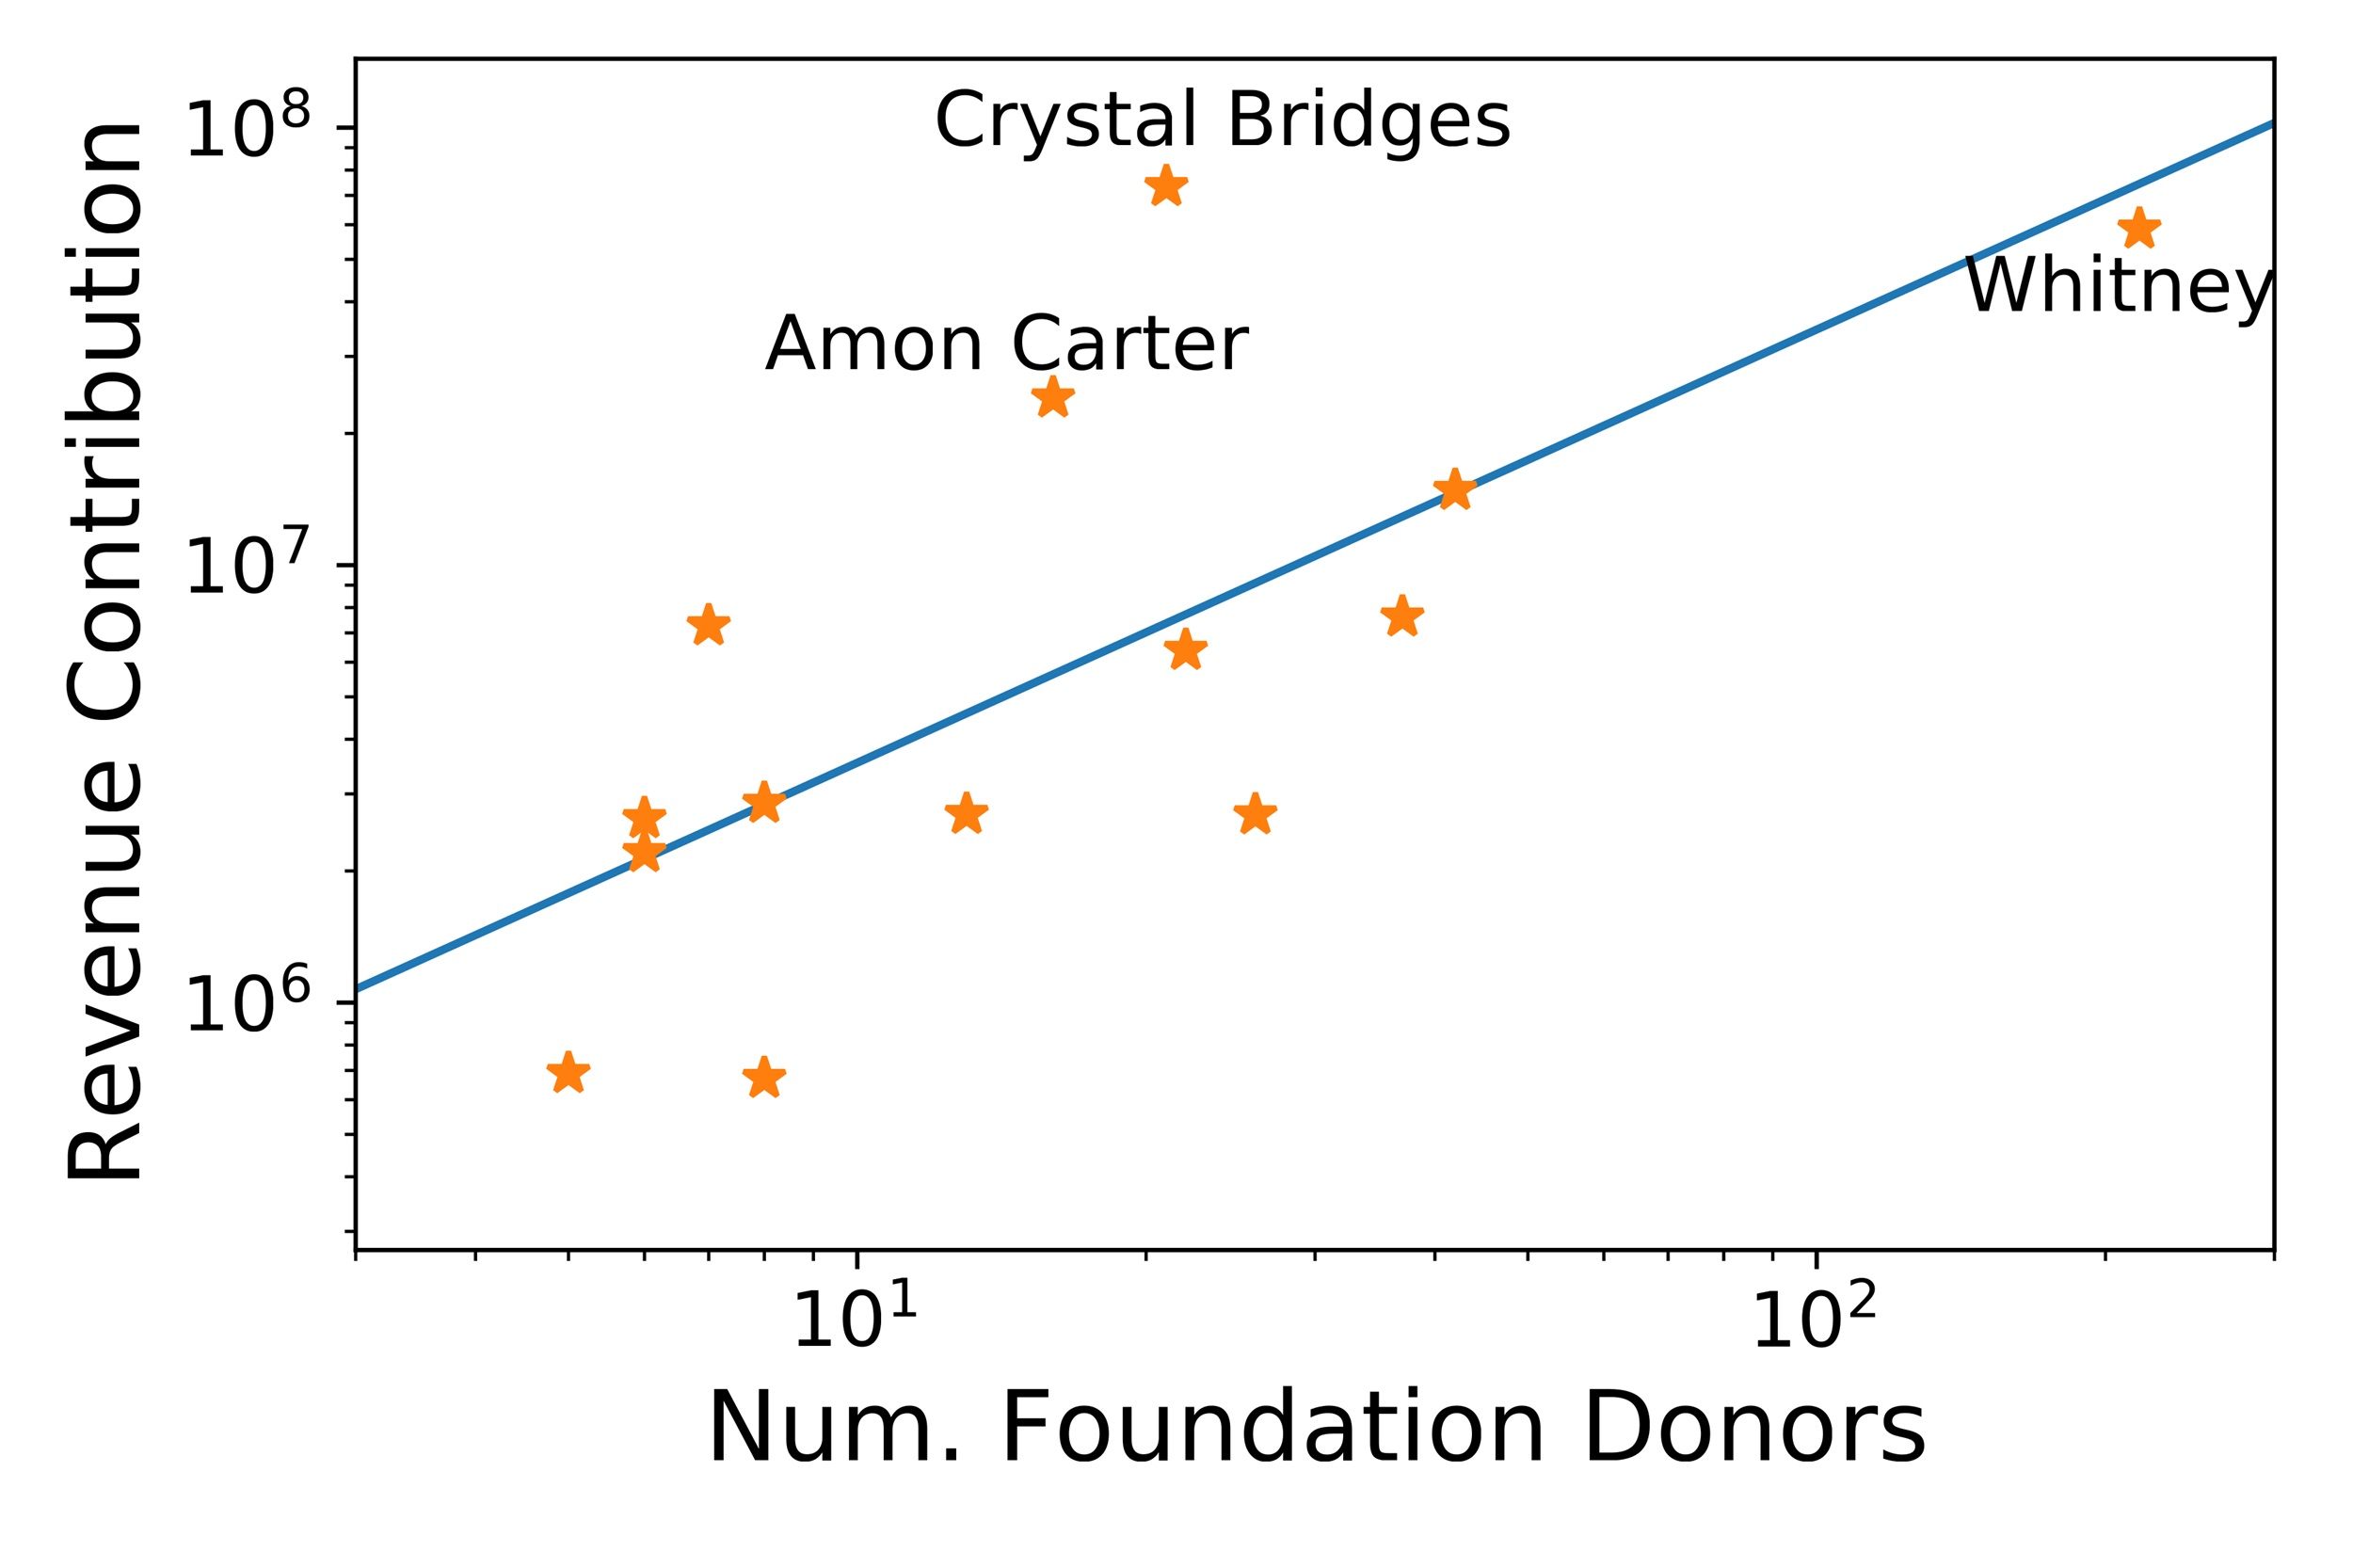 Scatter chart showing "Revenue Contribution" on the Y axis and "Num. Foundation Donors" on the X axis. Crystal Bridges, Amon Carter, and the Whitney are all on the upper end of the Y axis; the Whitney alone is on the upper end of the X axis.